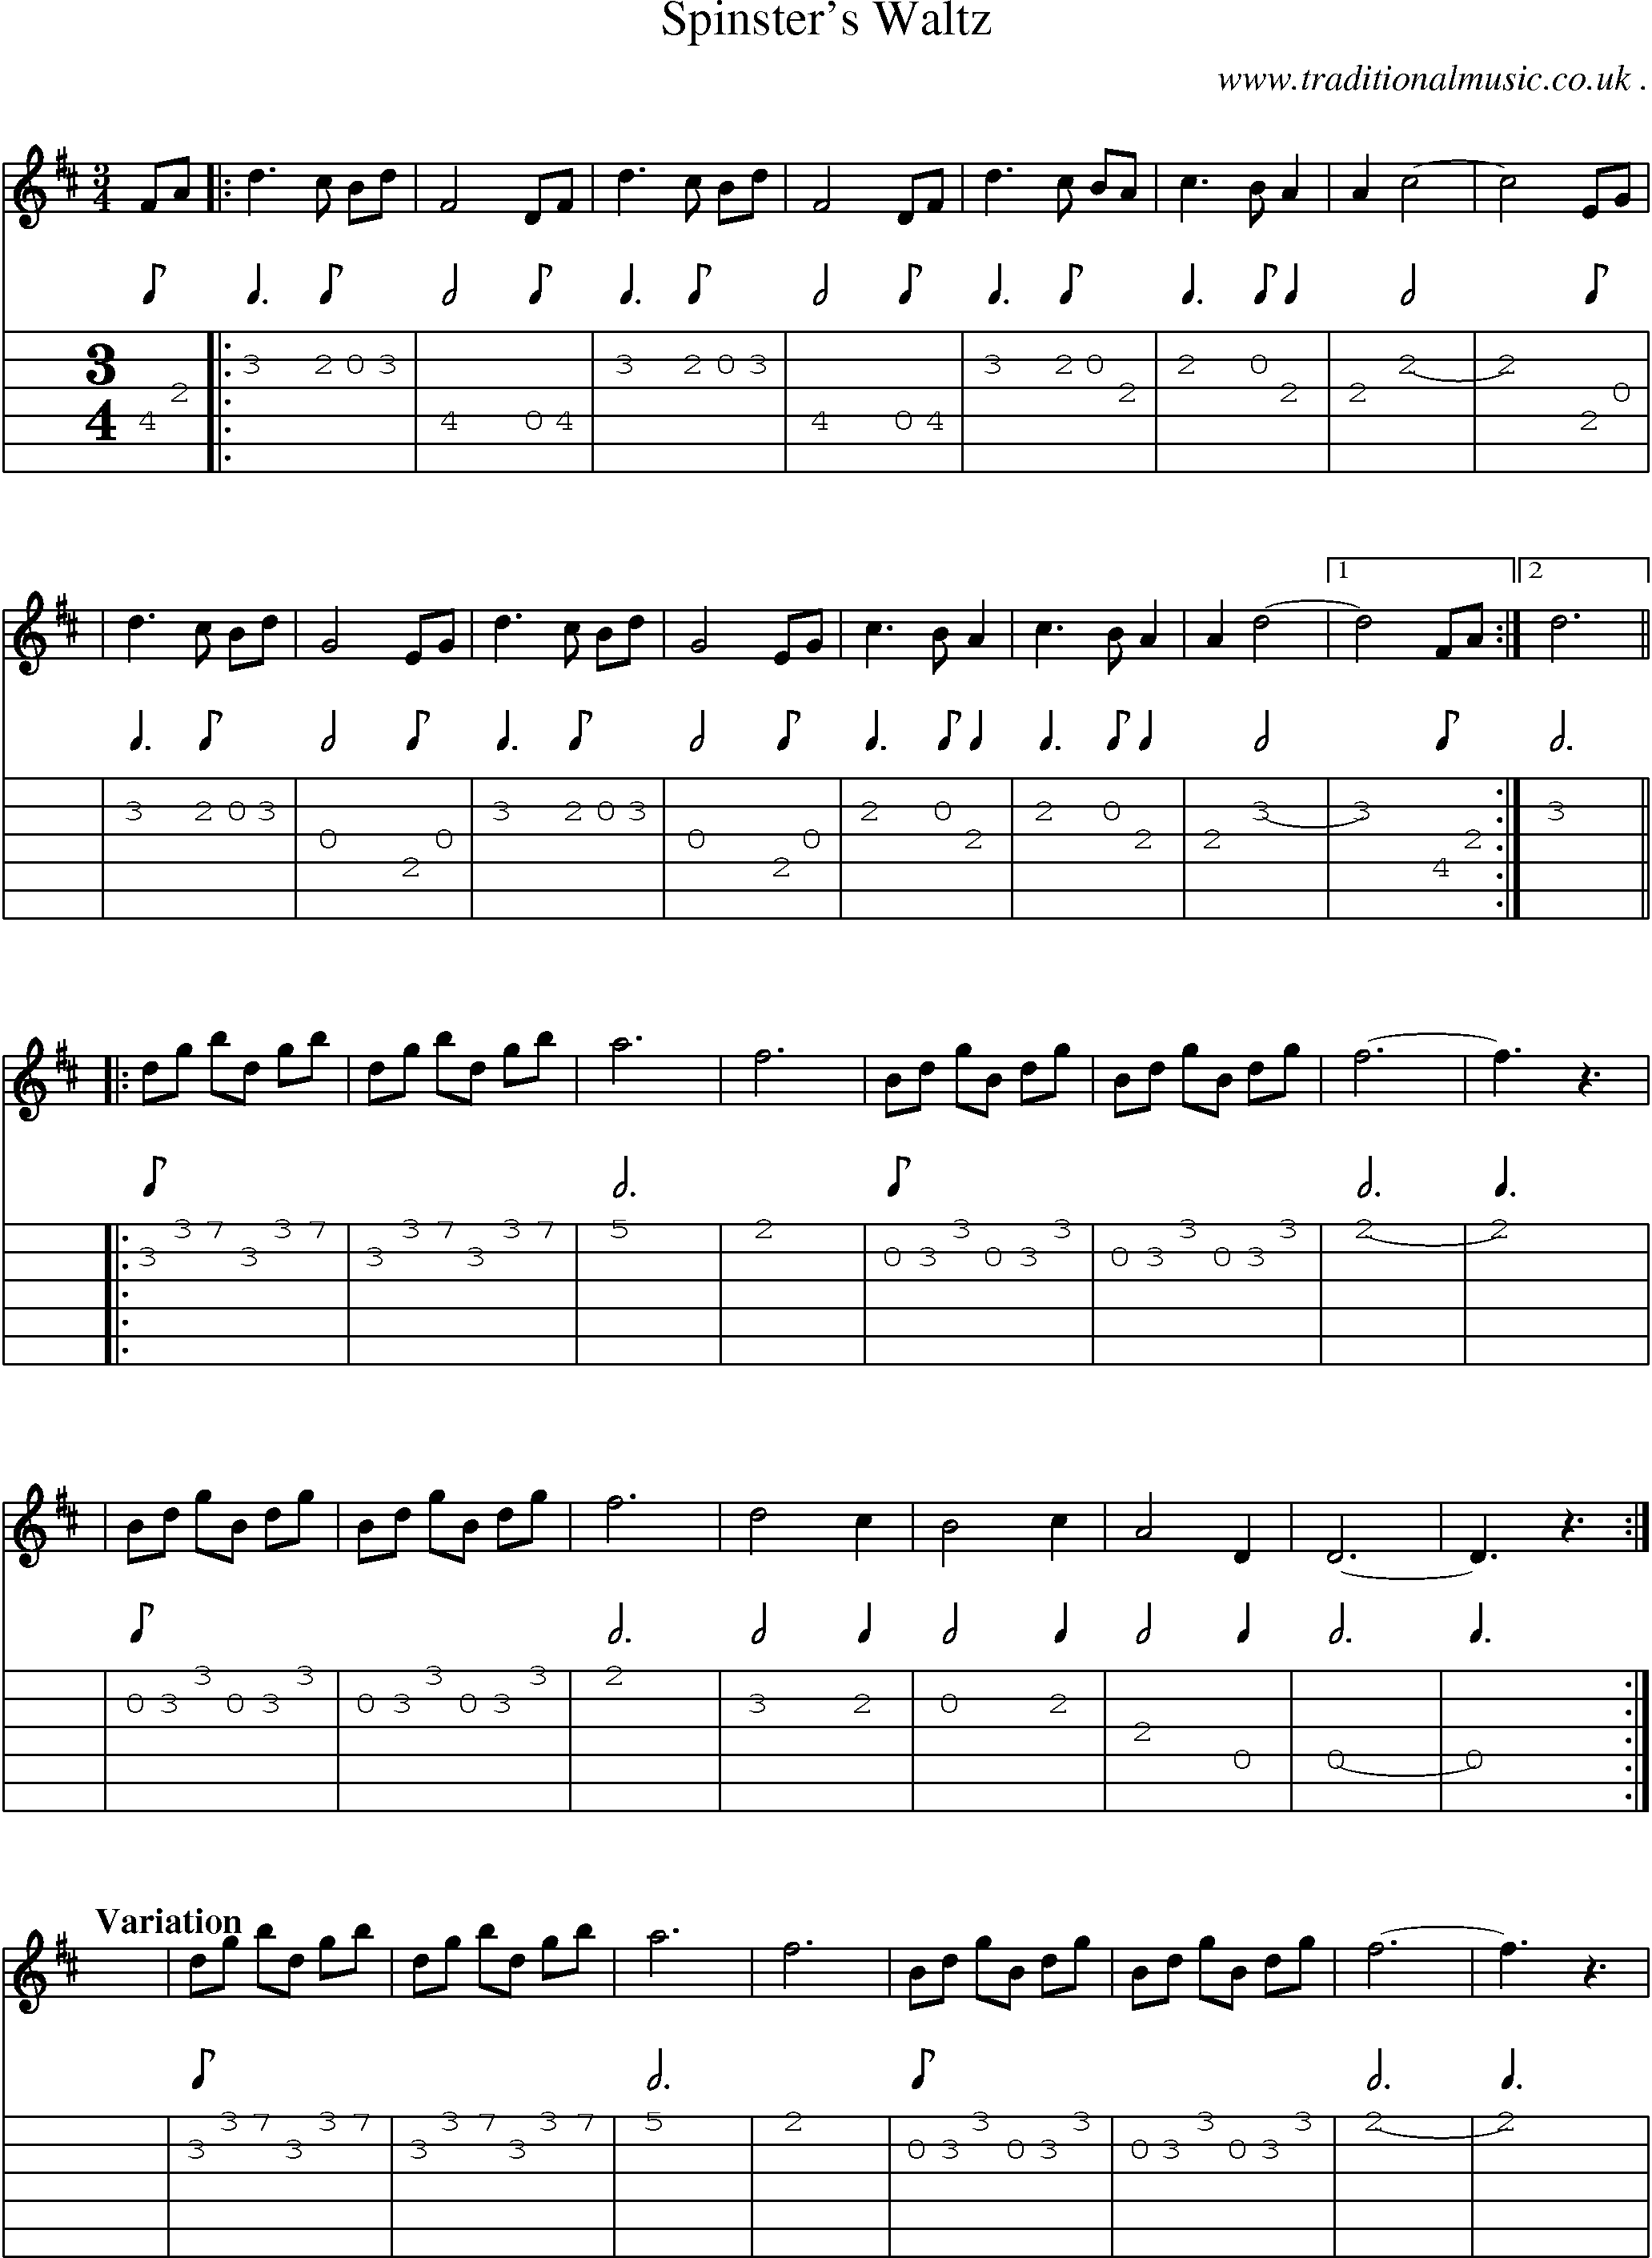 Sheet-music  score, Chords and Guitar Tabs for Spinsters Waltz